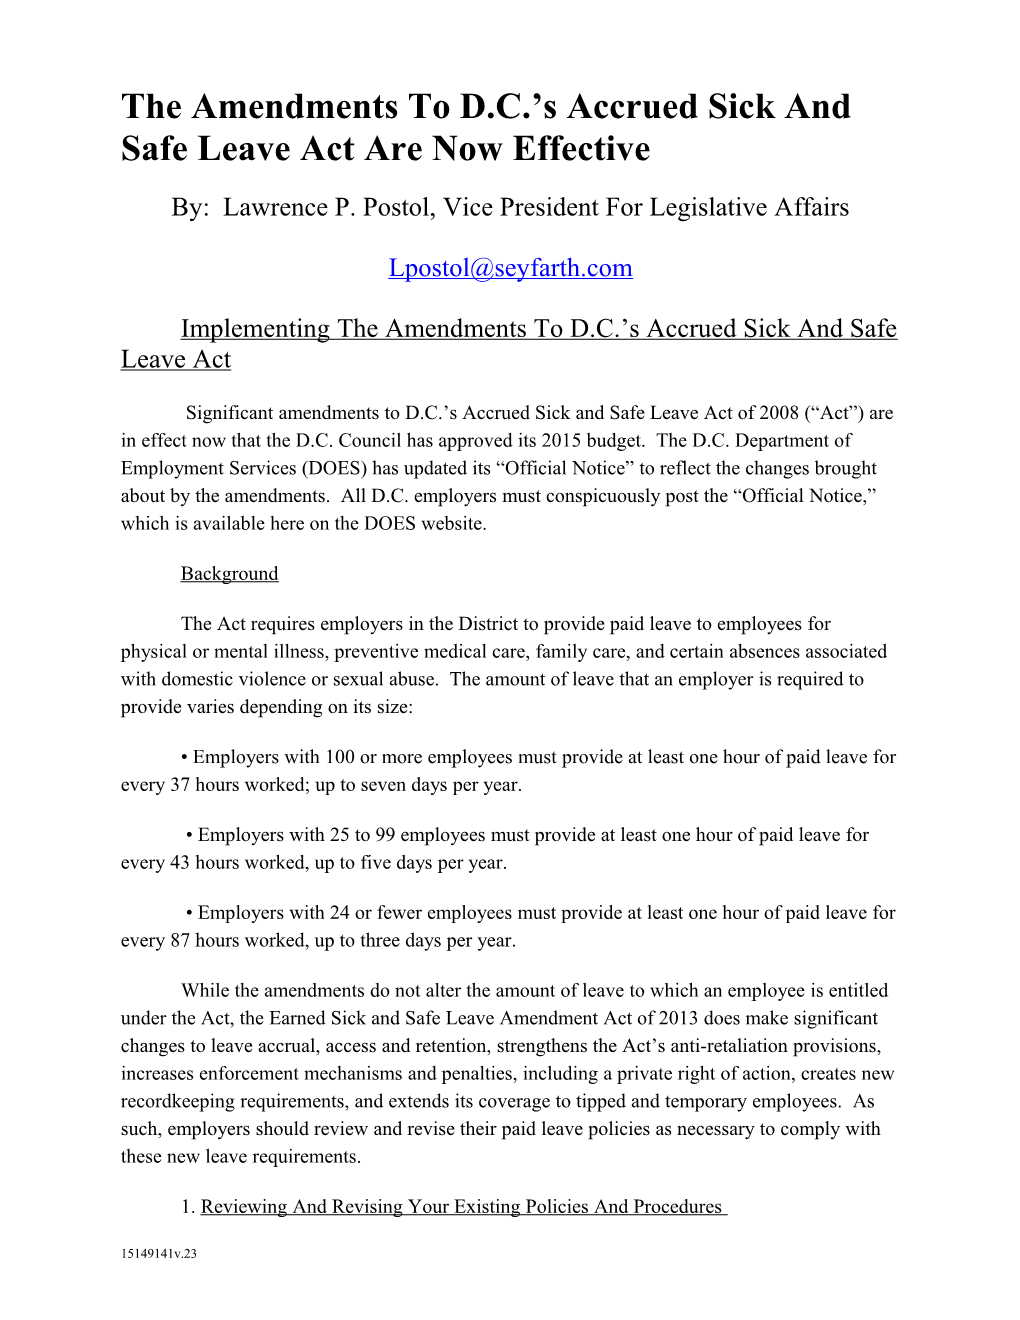 The Amendments to D.C. S Accrued Sick and Safe Leave Act Are Now Effective